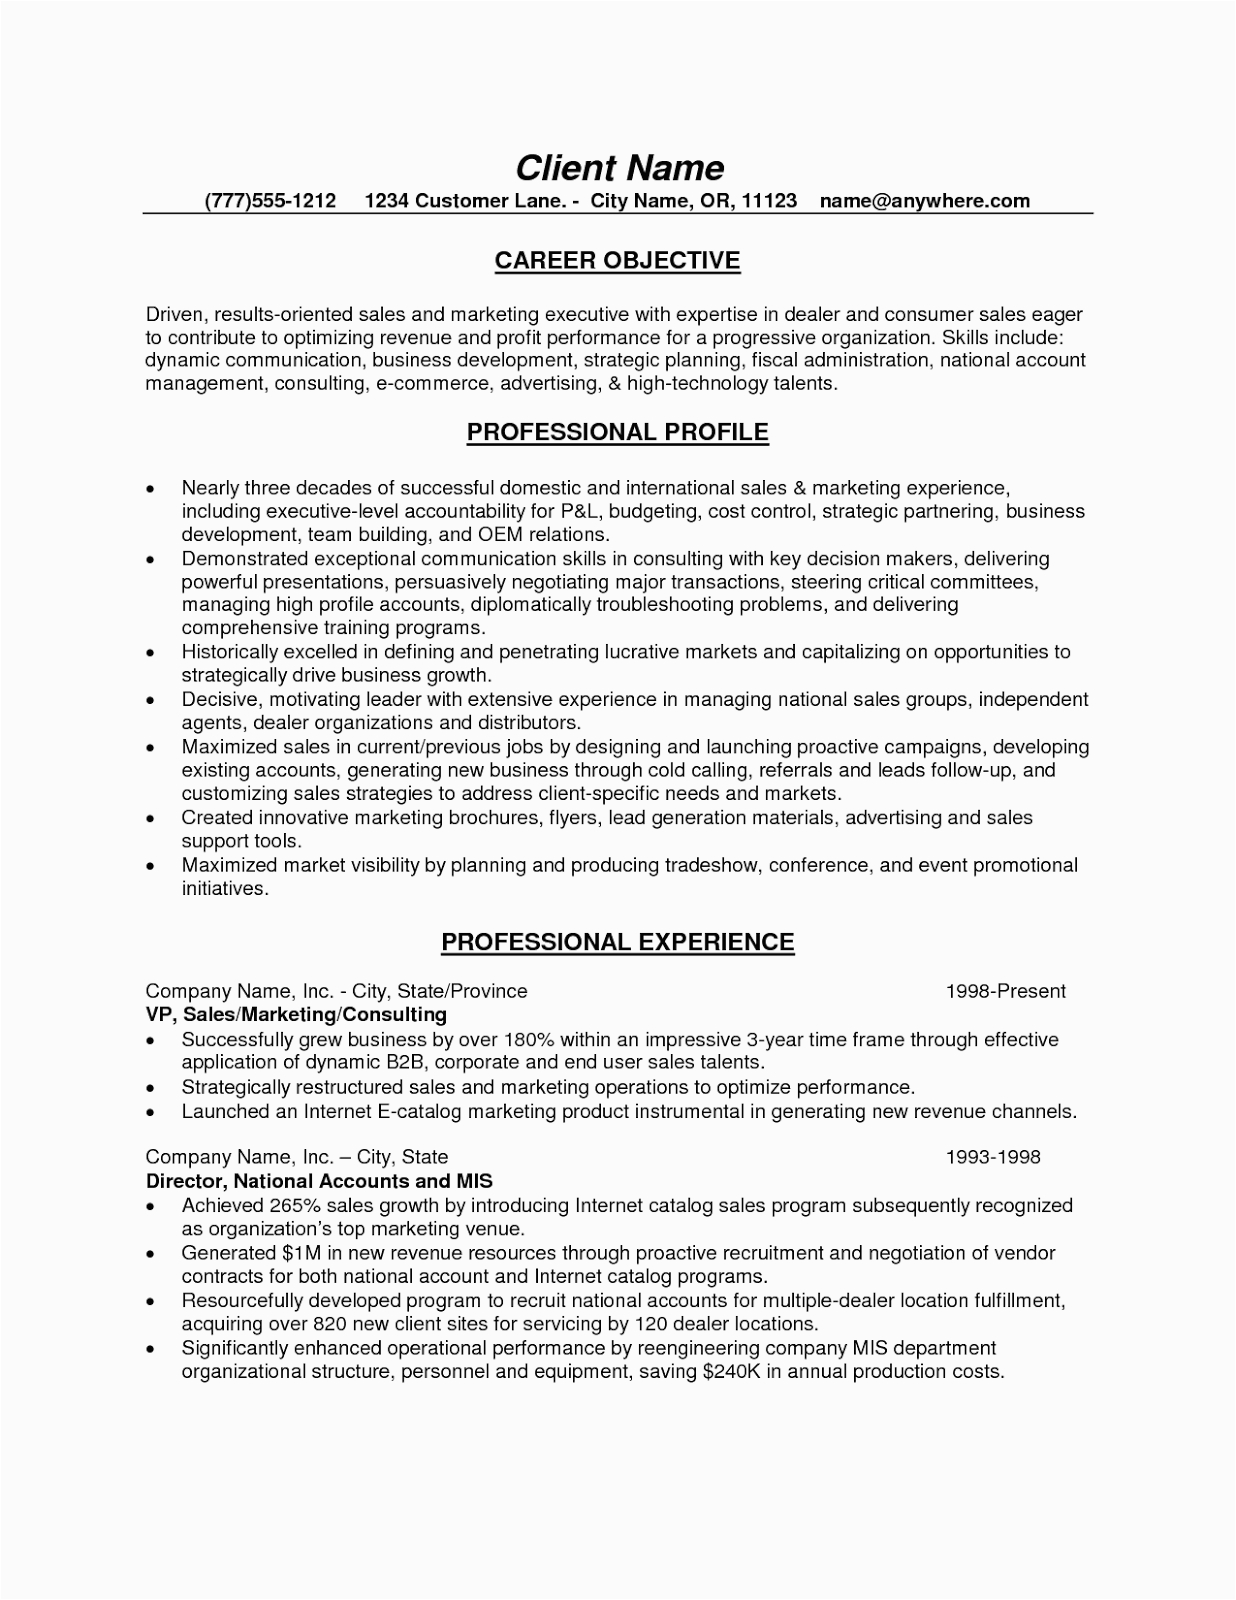 Sample Resume Objective for Sales Position Free Sales Resume Objective Examples Tipss Und Vorlagen